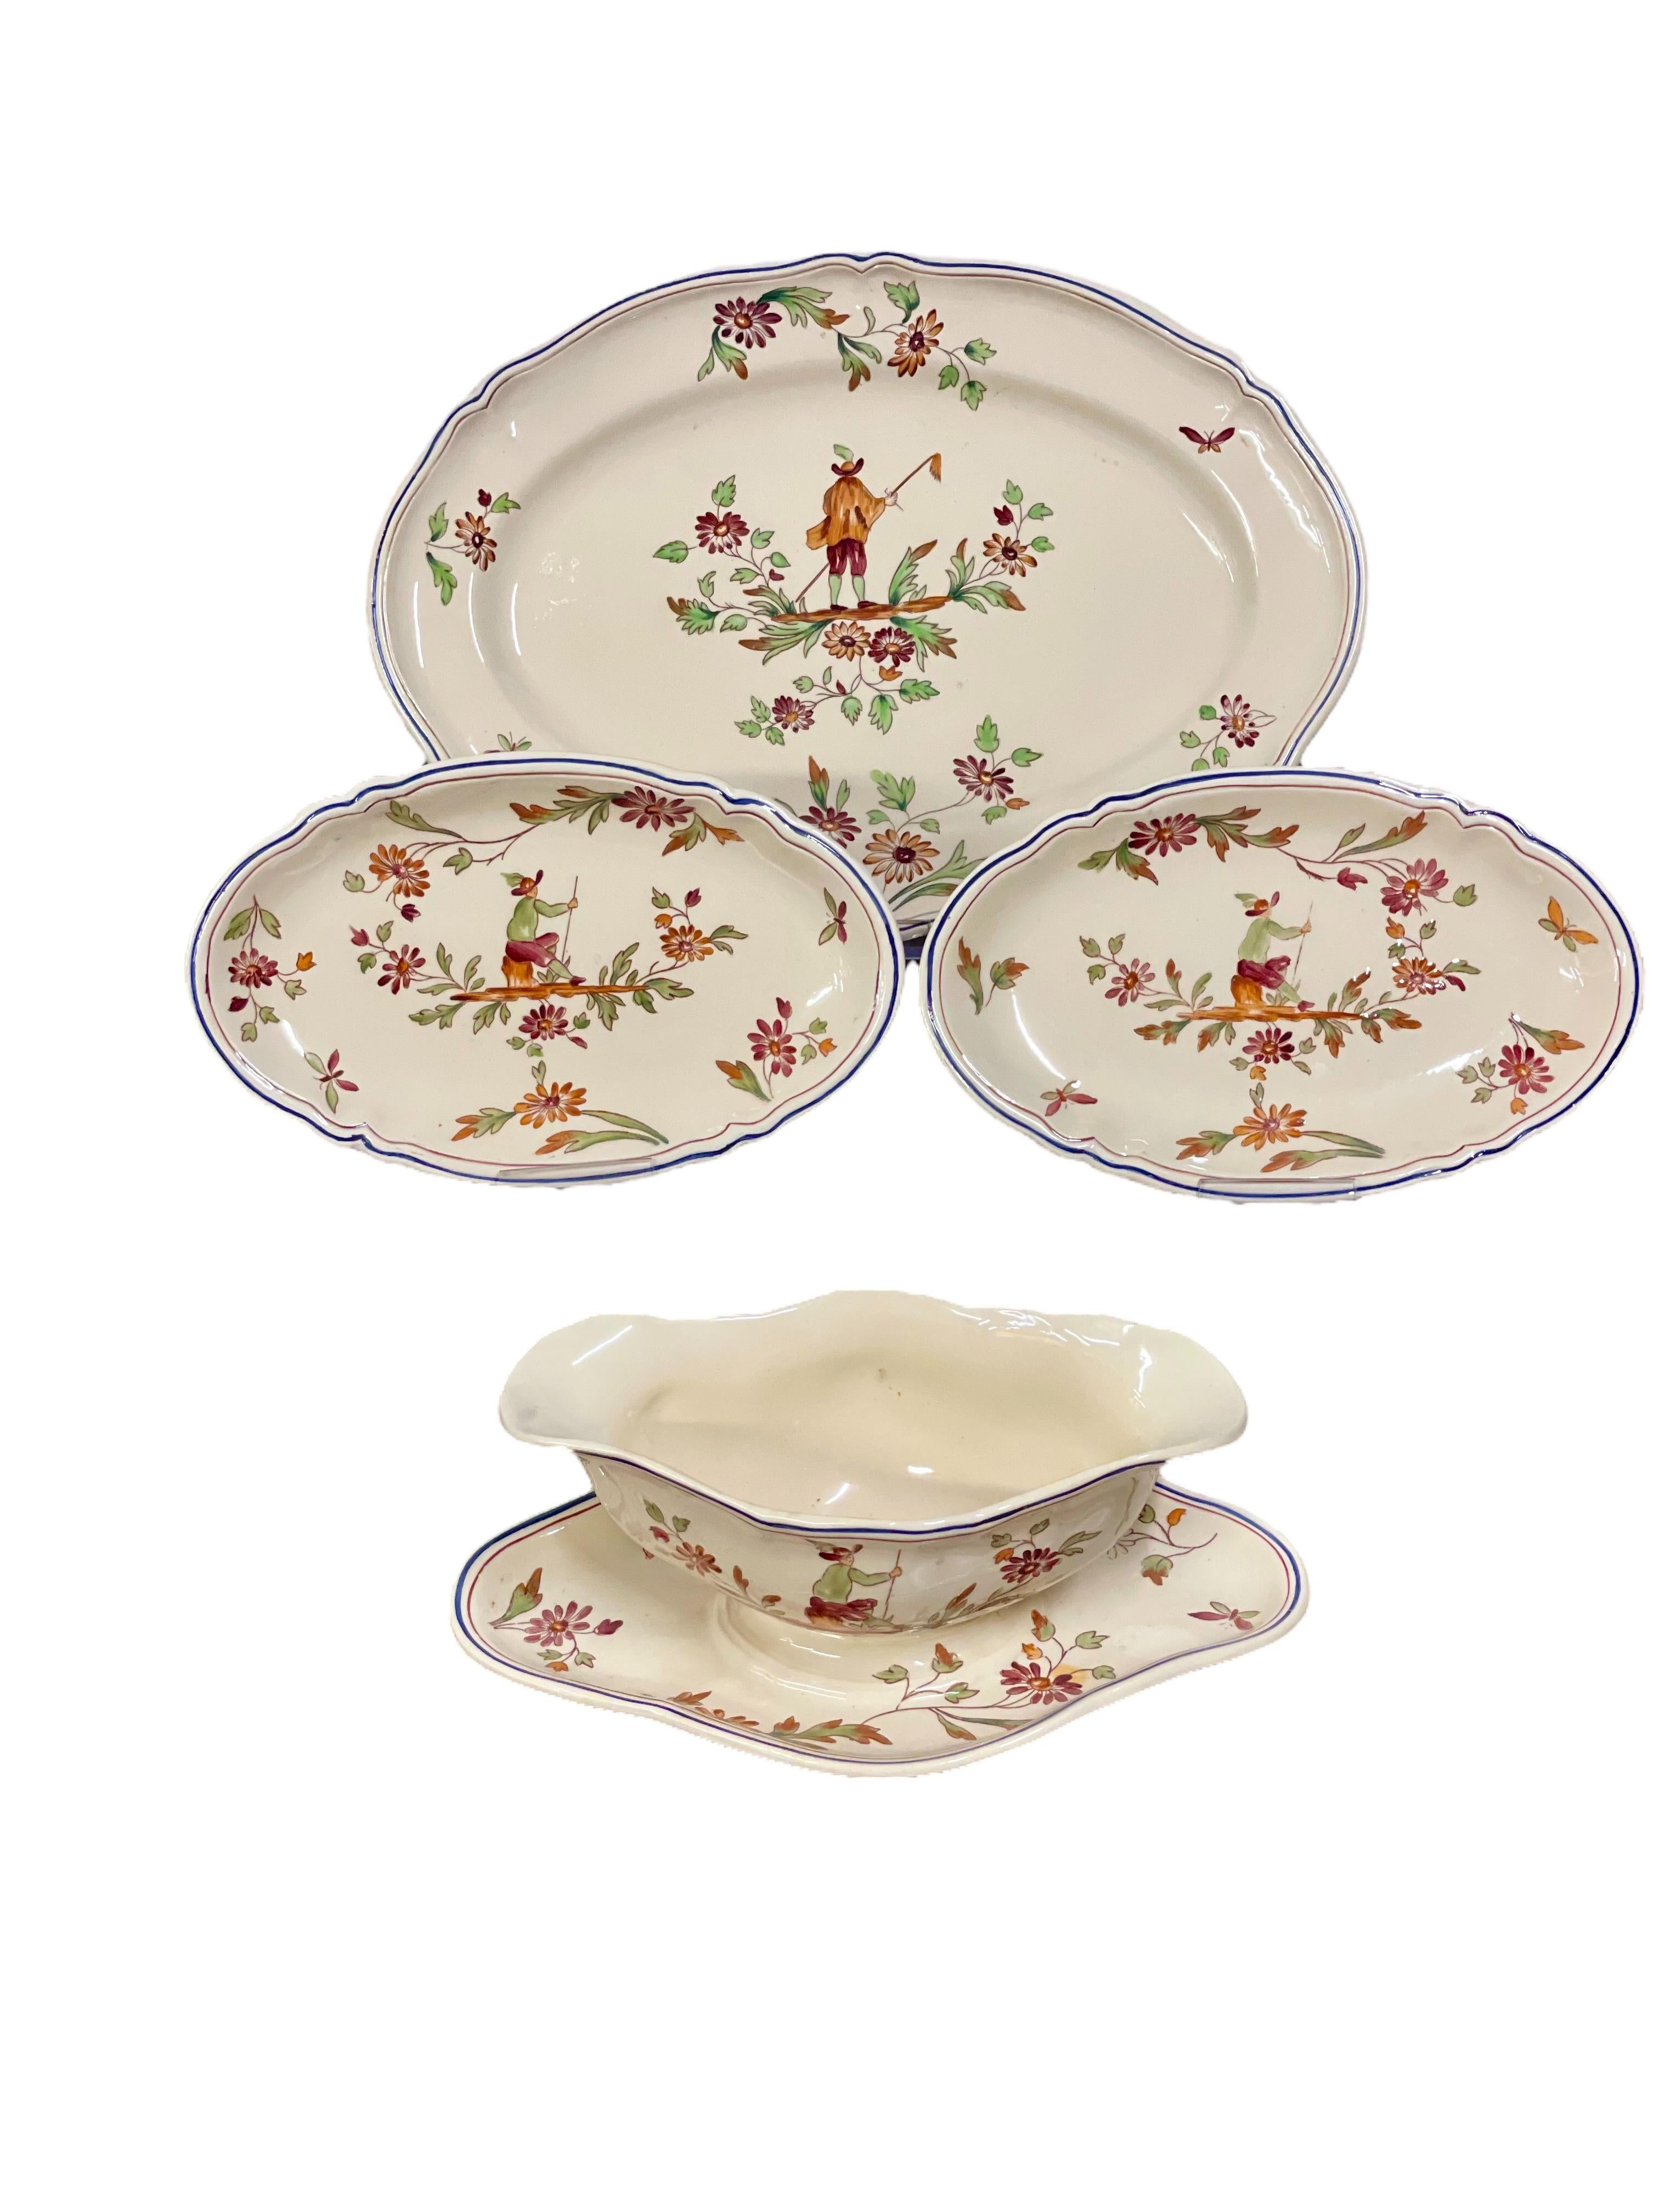 20th Century Moustiers by Longchamp French Faience Dinner Service for 12  For Sale